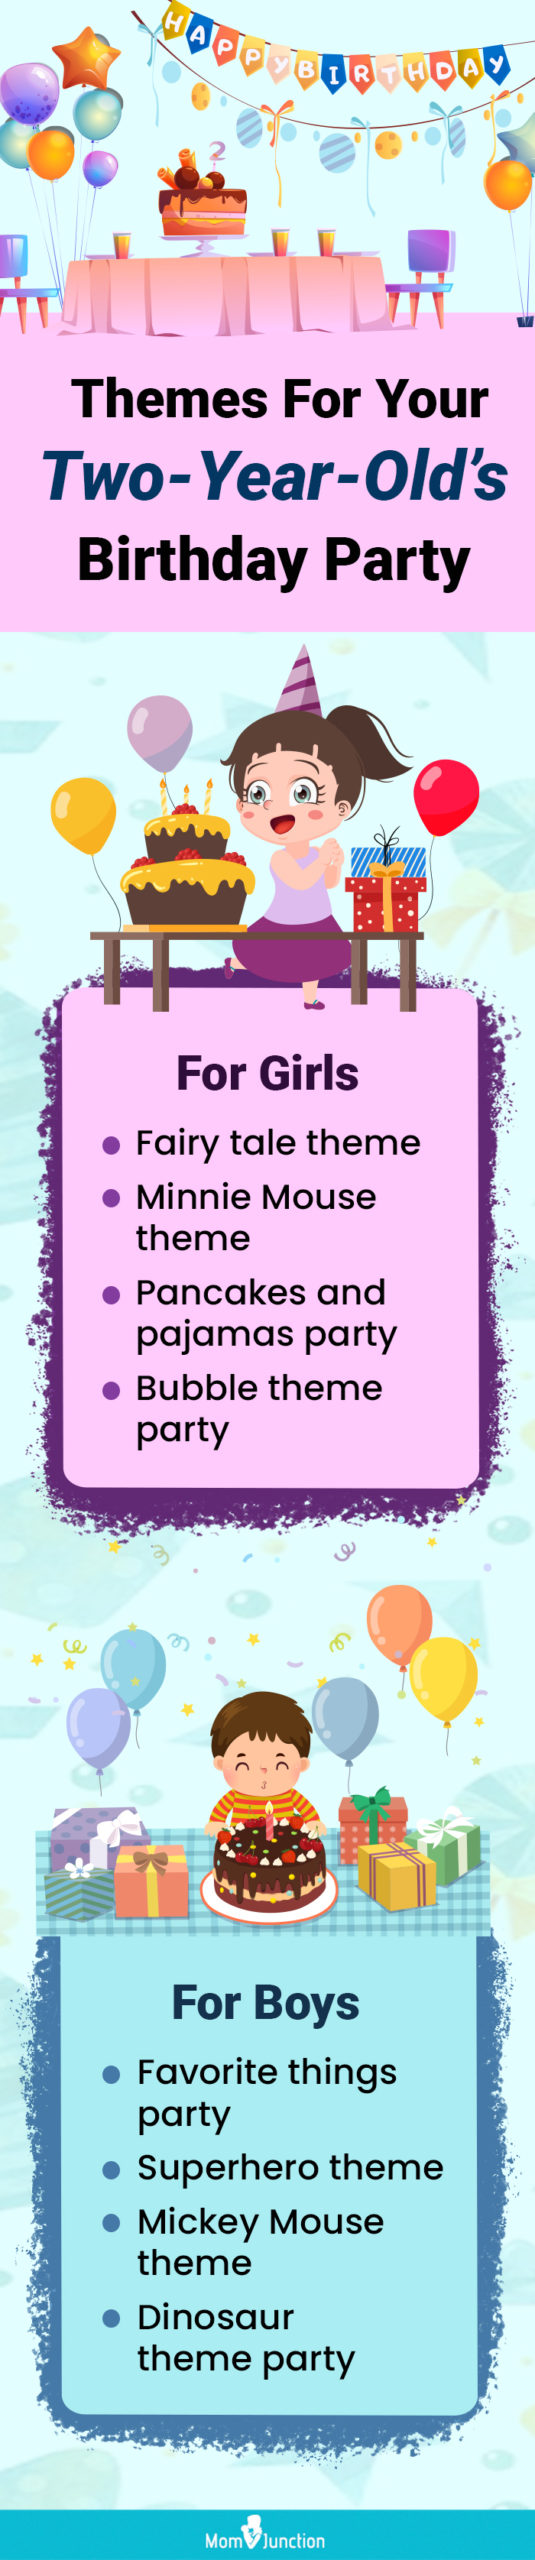 themes for your two year olds birthday party (infographic)